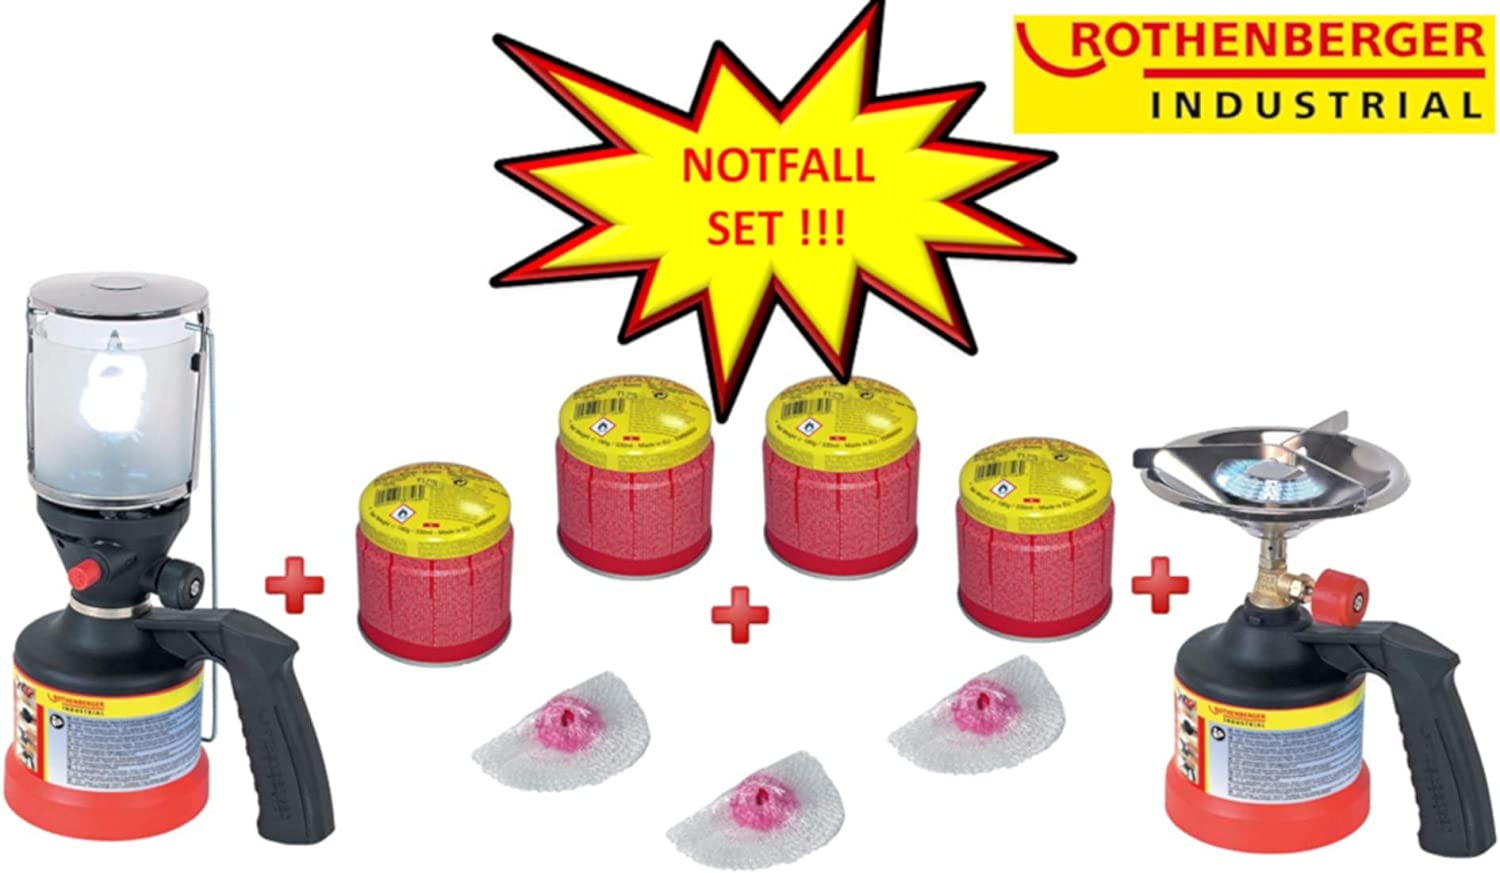 Rothenberger Industrial Notfall Set